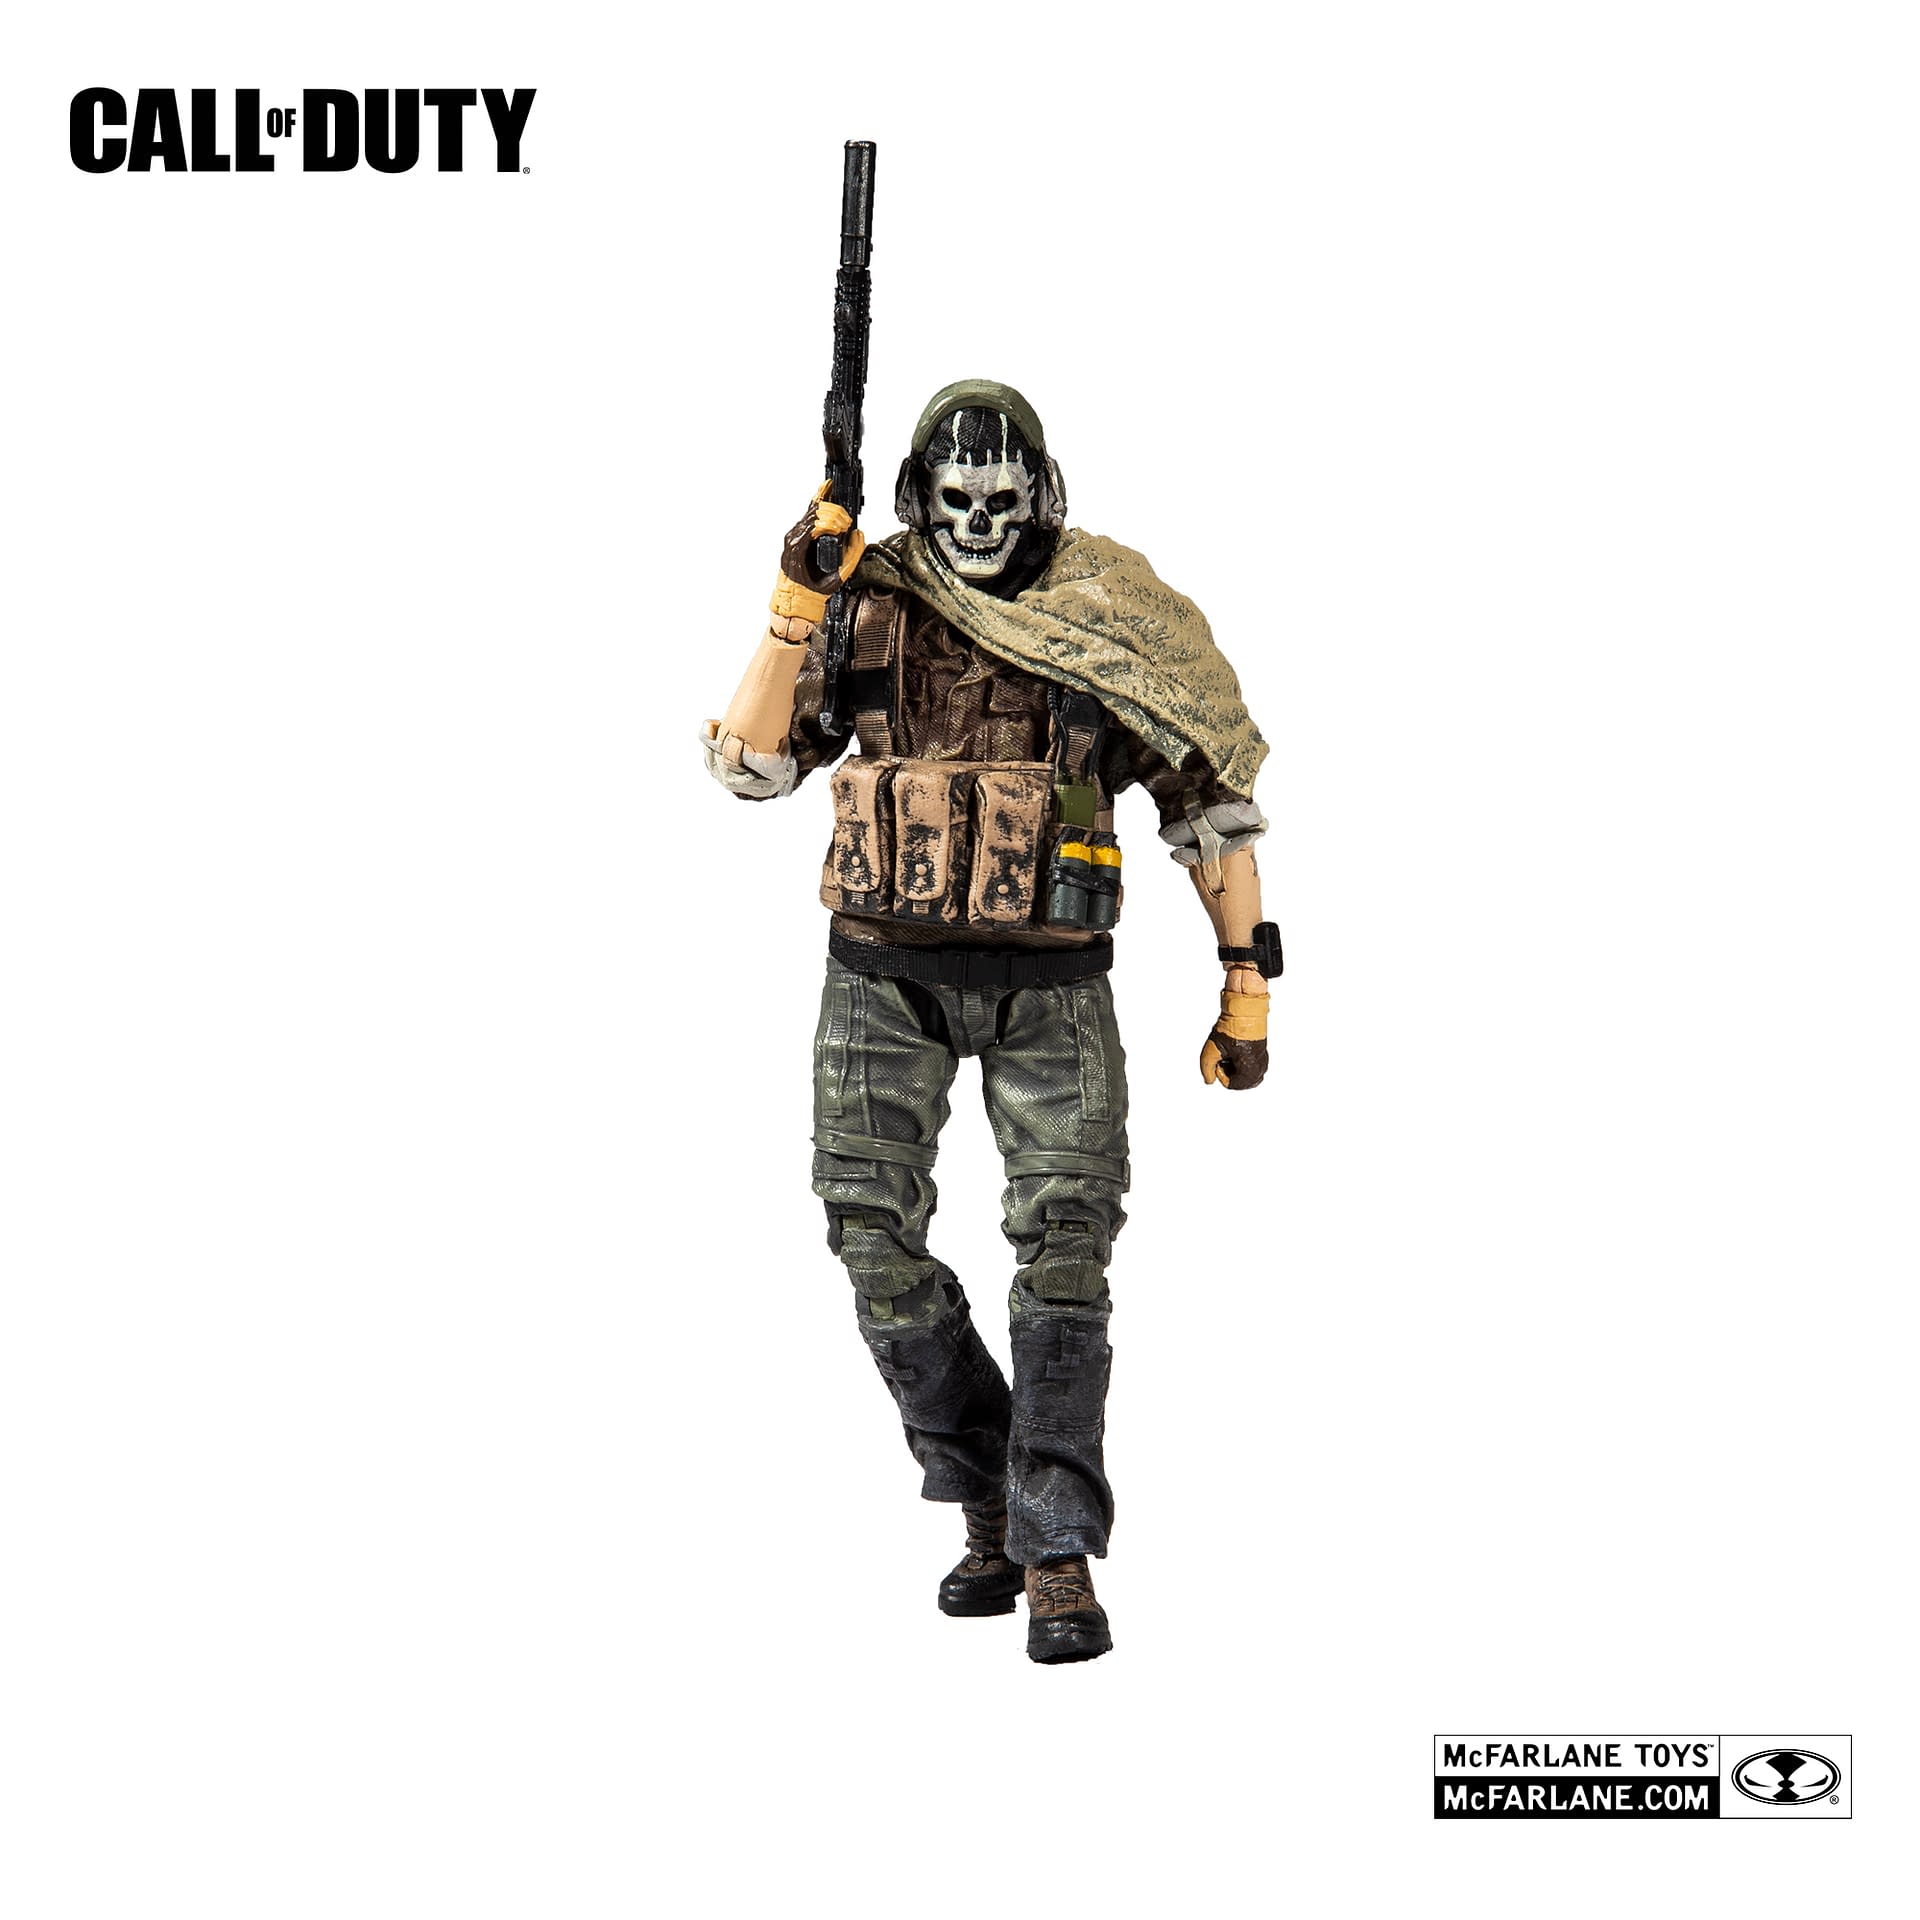 Call of Duty Ghost Enters the War with McFarlane Toys